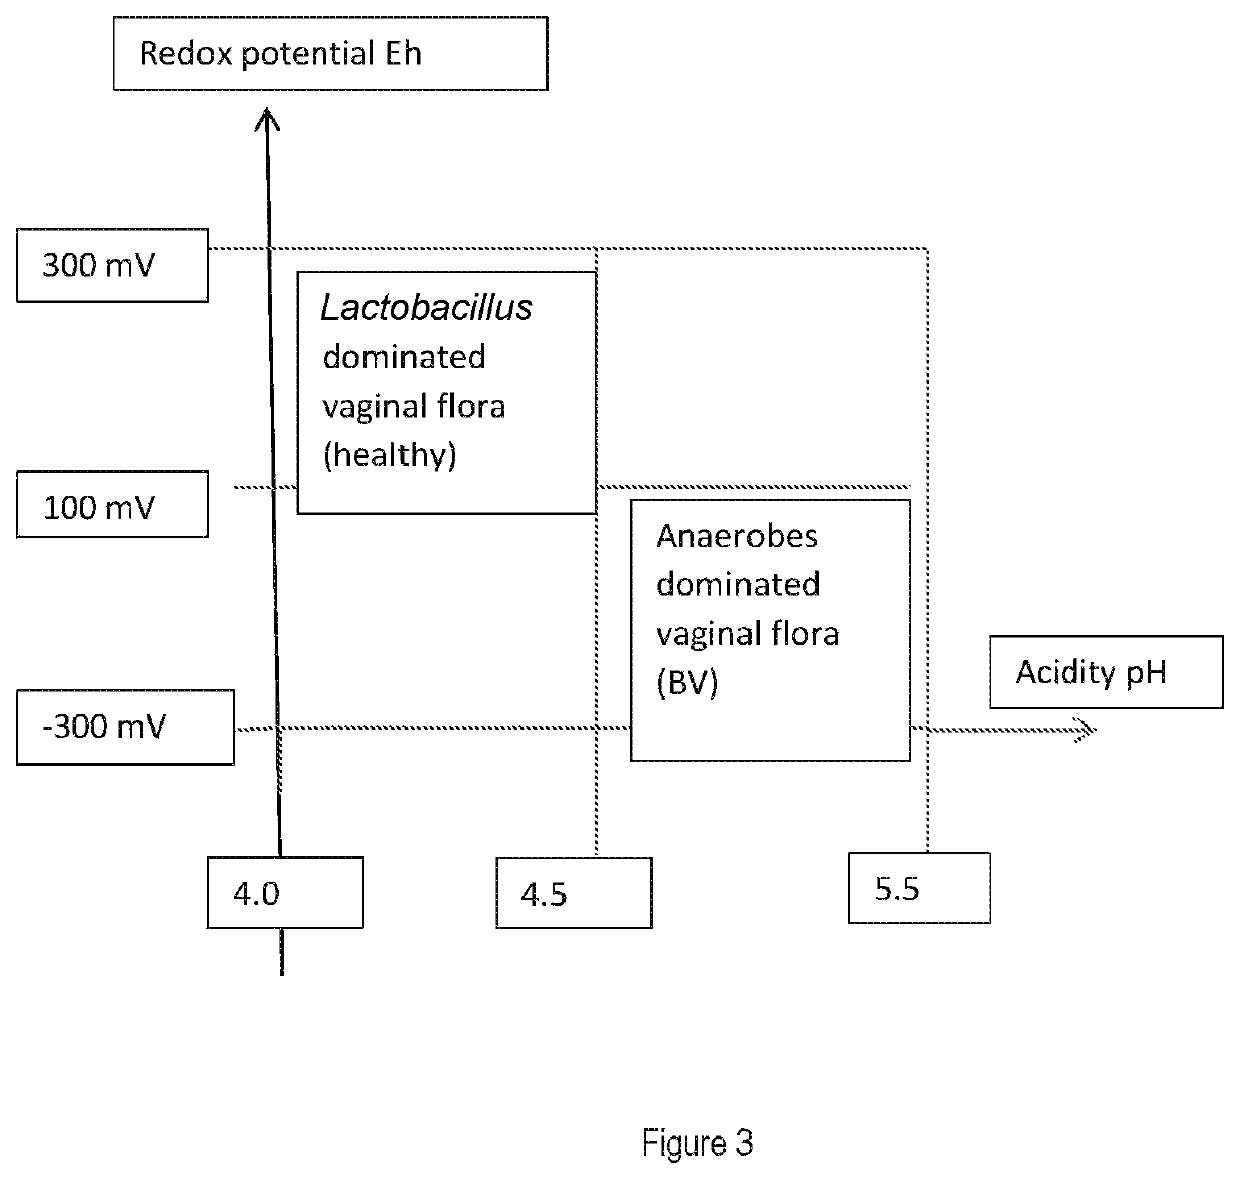 Urogenital medical device formulation based on suitable biochemical compositions for the stabilization of the acidity and the redox state of the vaginal fluid